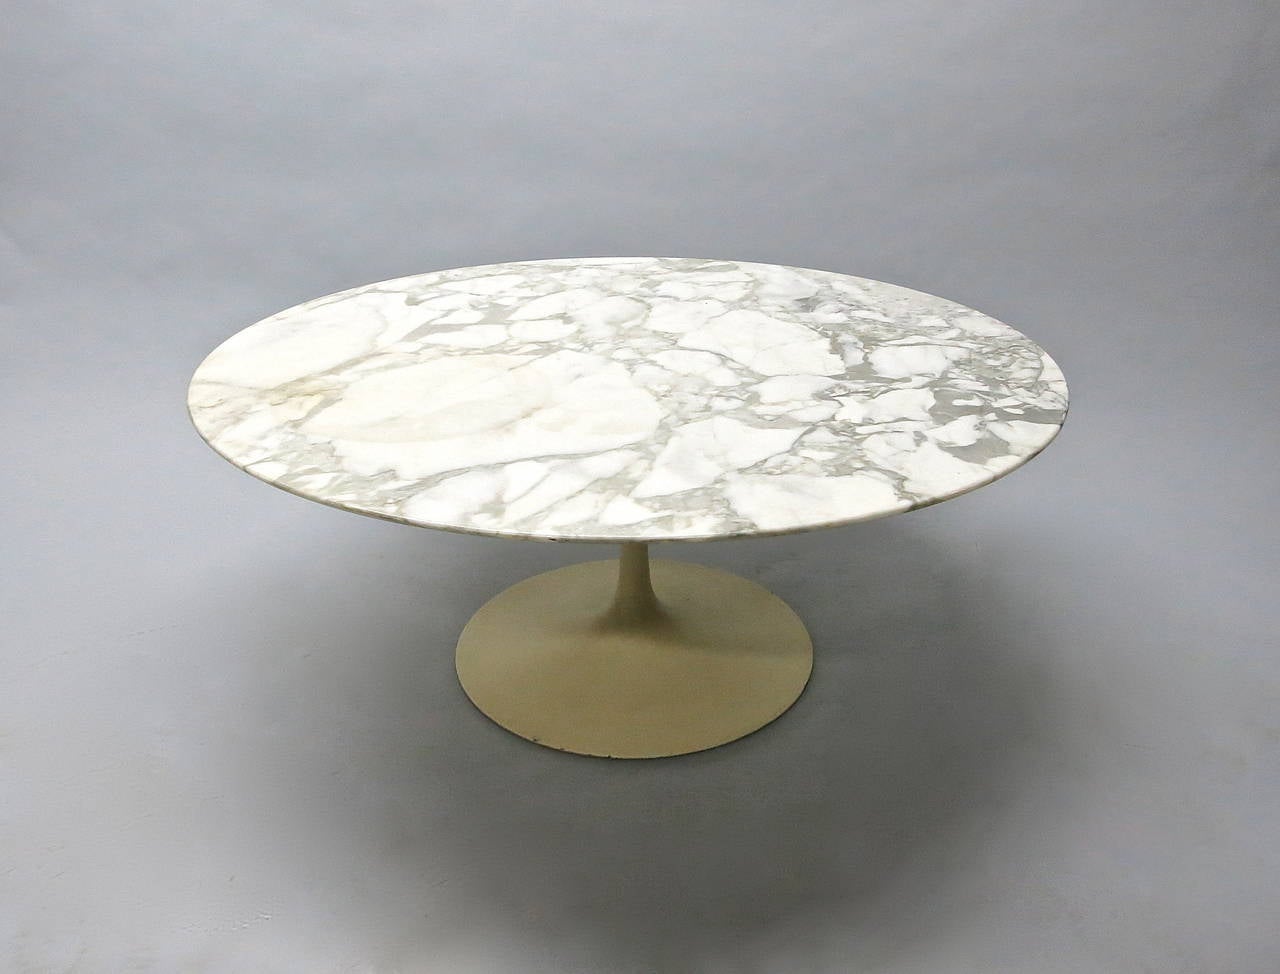 American Round Marble Coffee Table Designed by Eero Saarinen for Knoll, USA, circa 1960